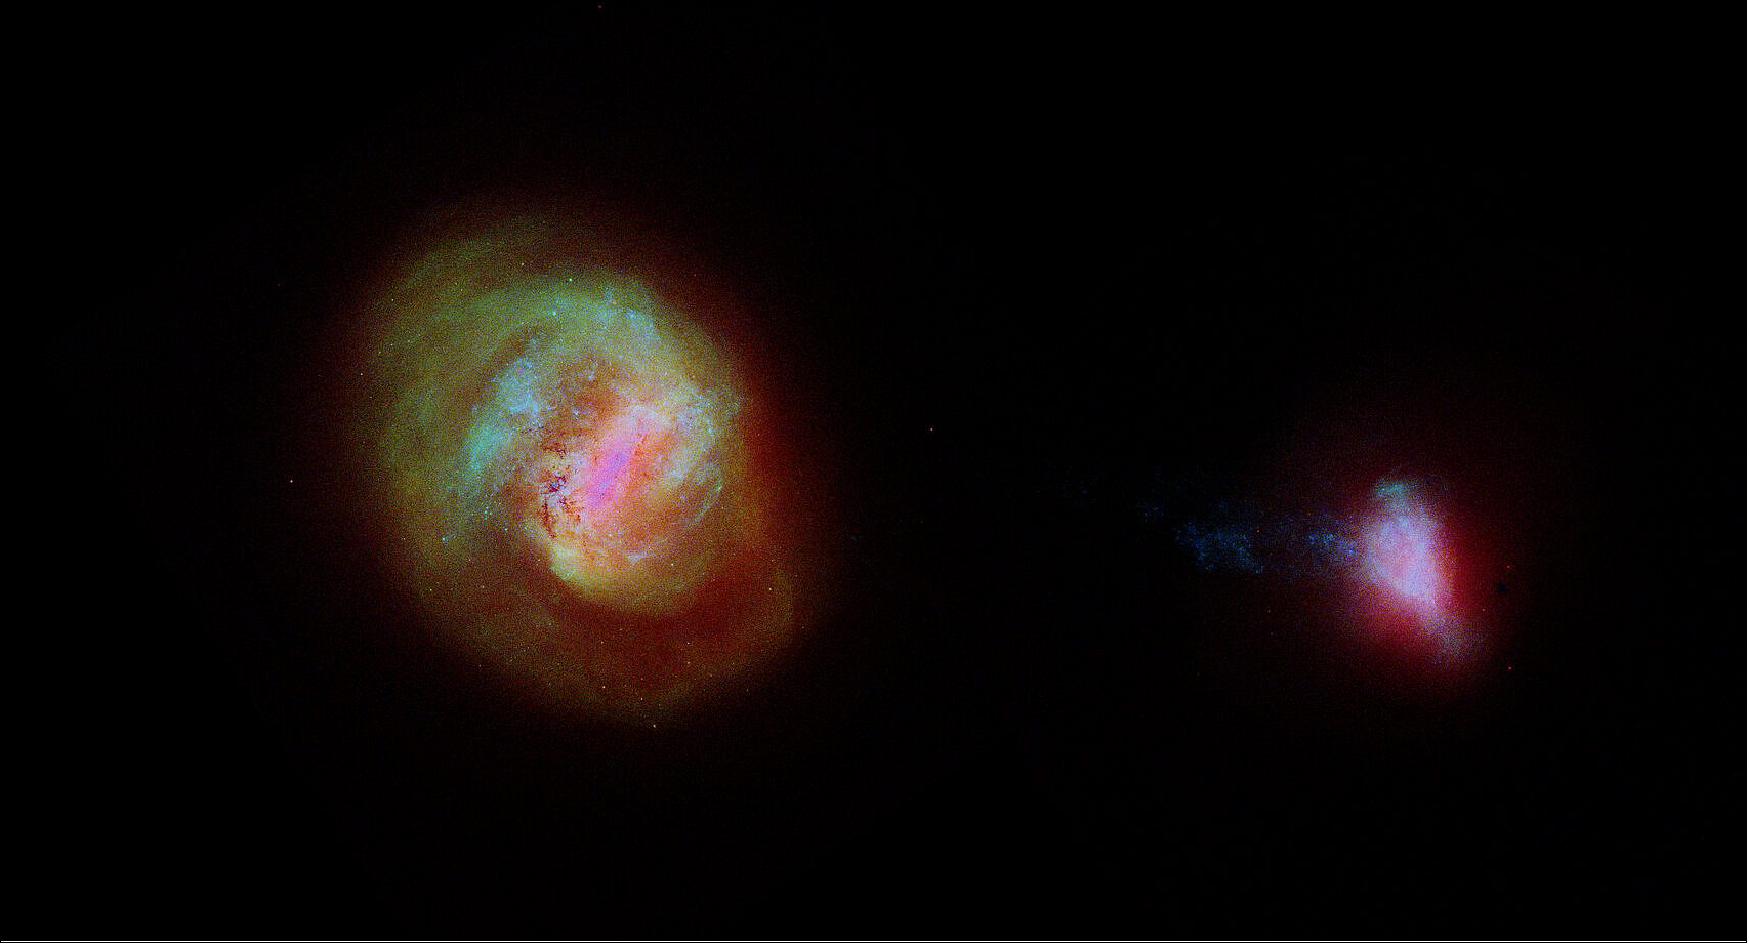 Figure 50: Gaia’s view of the Milky Way’s neighboring galaxies. The Large and Small Magellanic Clouds (LMC and SMC, respectively) are two dwarf galaxies that orbit the Milky Way. This image shows the stellar density of the satellite galaxies as seen by Gaia in its Early Data Release 3, which was made public on 3 December 2020. It is composed of red, green and blue layers, which trace mostly the older, intermediate age, and younger stars respectively. Astronomers place stars into categories that are often named for their color and appearance. - In this image, the red layer contains evolved stars that compose the Red Giant Branch and Red Clump stars. The green layer contains Main Sequence stars of mixed ages of up to two billion years. The blue layer contains stars younger than 400 million years, Asymptotic Giant Branch stars, and RR-Lyrae and classical Cepheid variable stars. - The brightnesses used in this image are based on a logarithmic scale to enhance low surface density regions in the galaxies, for example the outer spiral arm in the LMC visible in the upper left.- The density of younger stars has been artificially enhanced with respect to the other evolutionary phases to make them more clearly visible. This shows that younger stars mostly trace the inner spiral structure of the LMC, and the ‘bridge’ of stars between the two galaxies. Finally, intermediate age and older stars trace the LMC bar, spiral arms, and outer halo, as well as the SMC outer halo [image credit: ESA/Gaia/DPAC; CC BY-SA 3.0 IGO. Acknowledgement: L. Chemin; X. Luri et al (2020)]